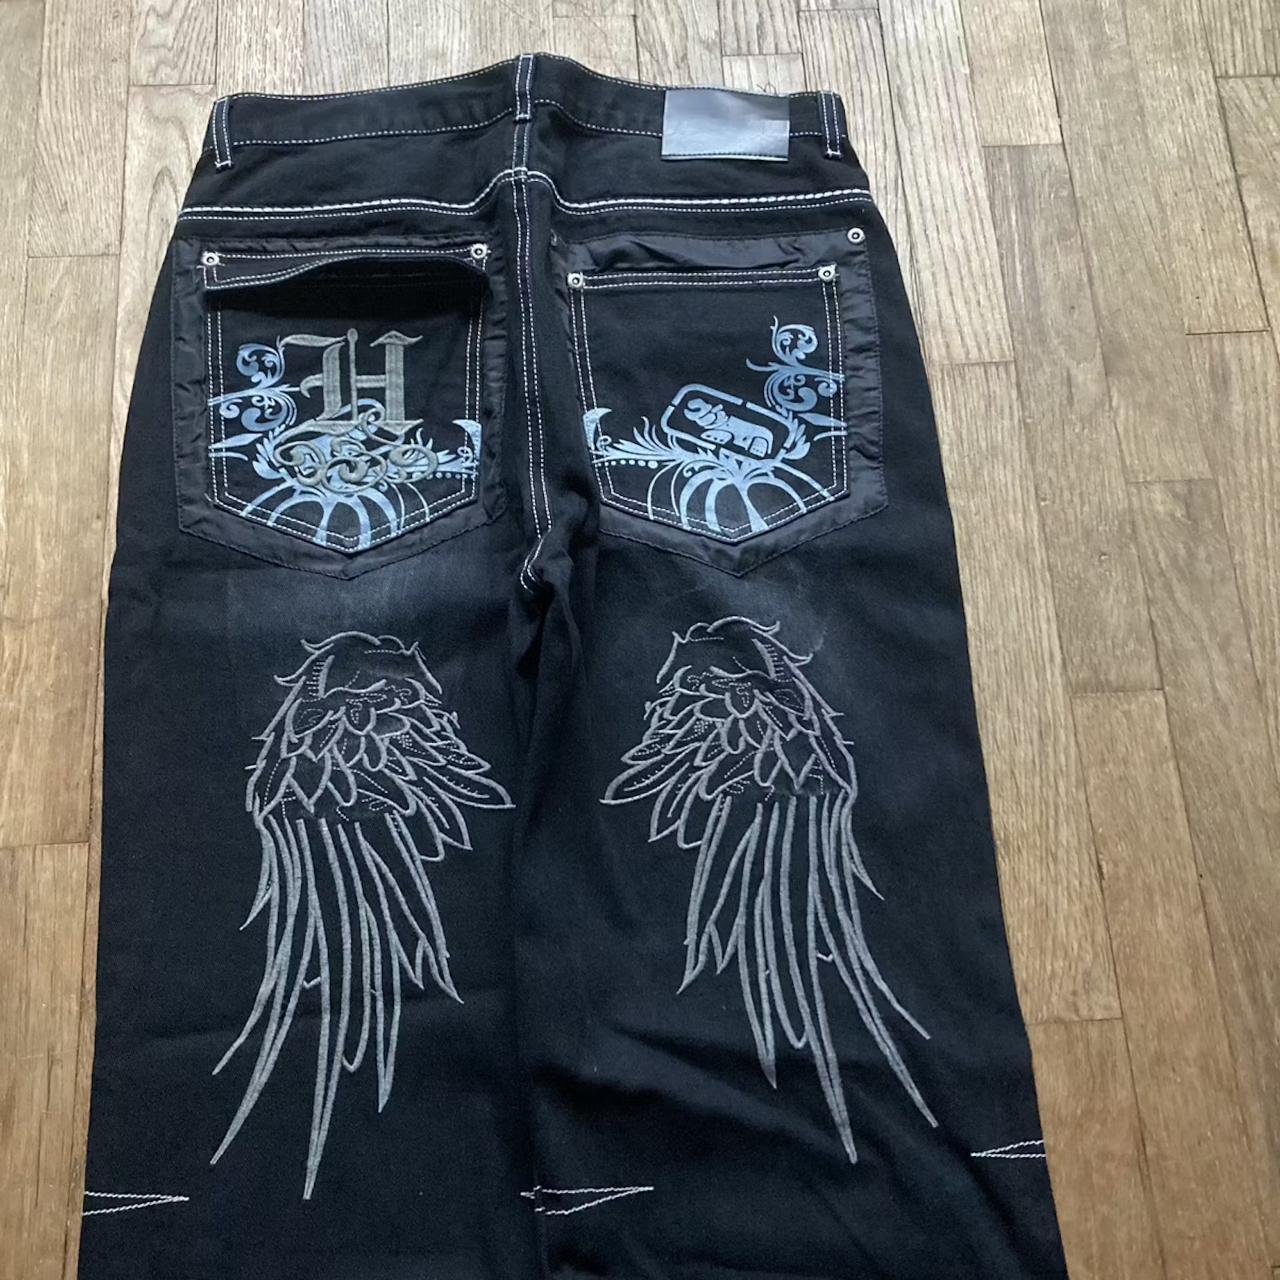 y2k/2000s baggy embroidered jeans Size 34 x... - Depop